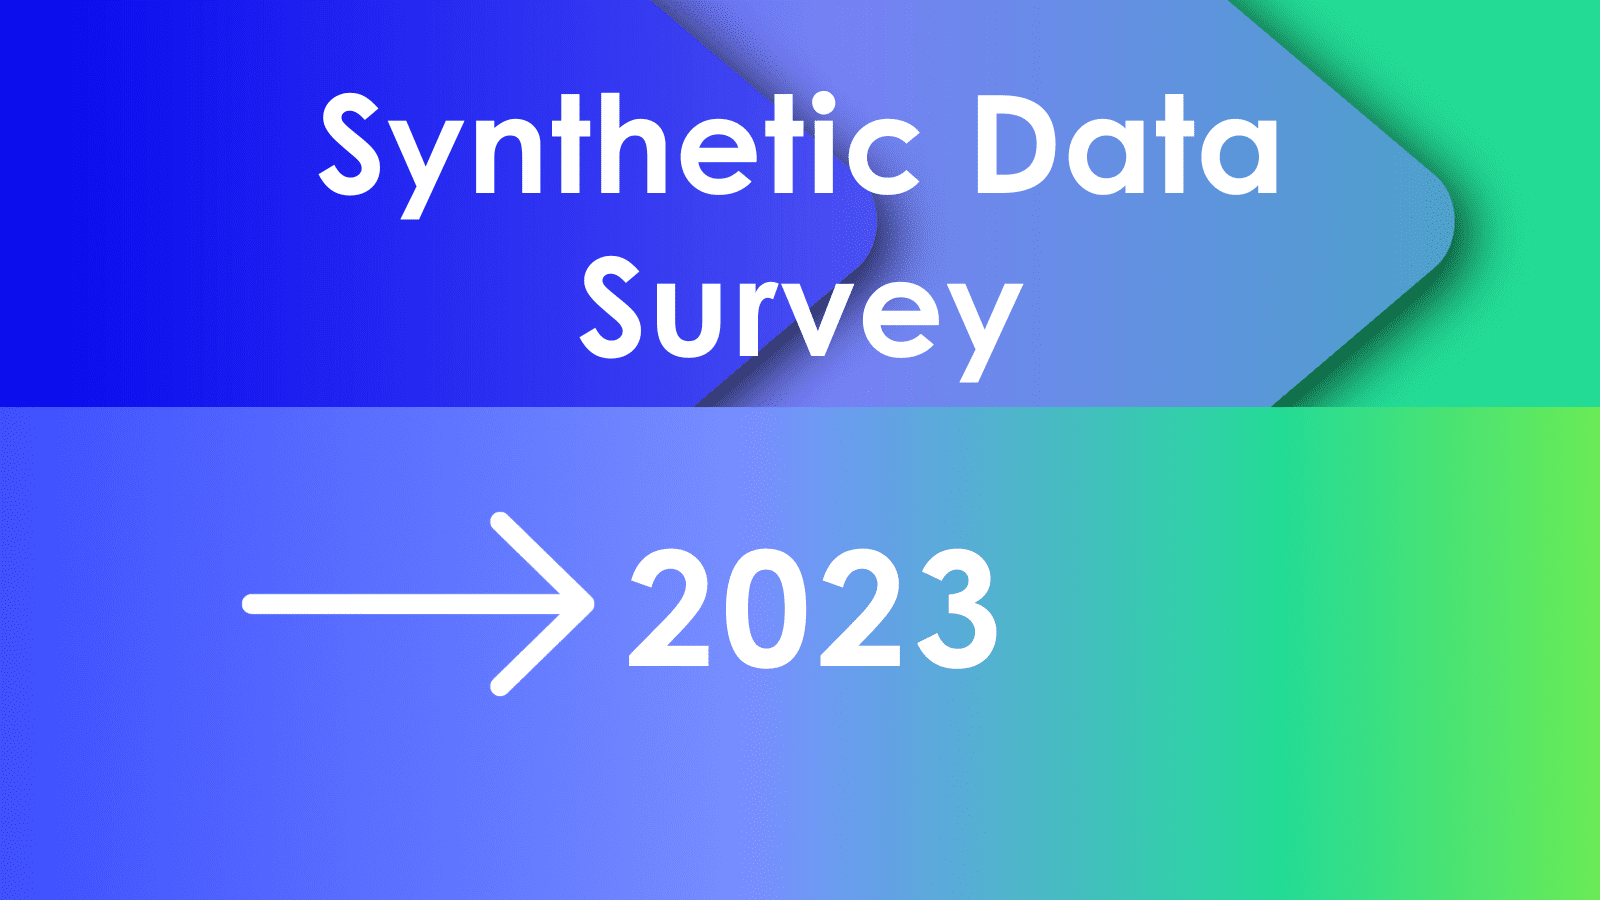 Data access is severely lacking in most companies, and 71% believe synthetic data can help